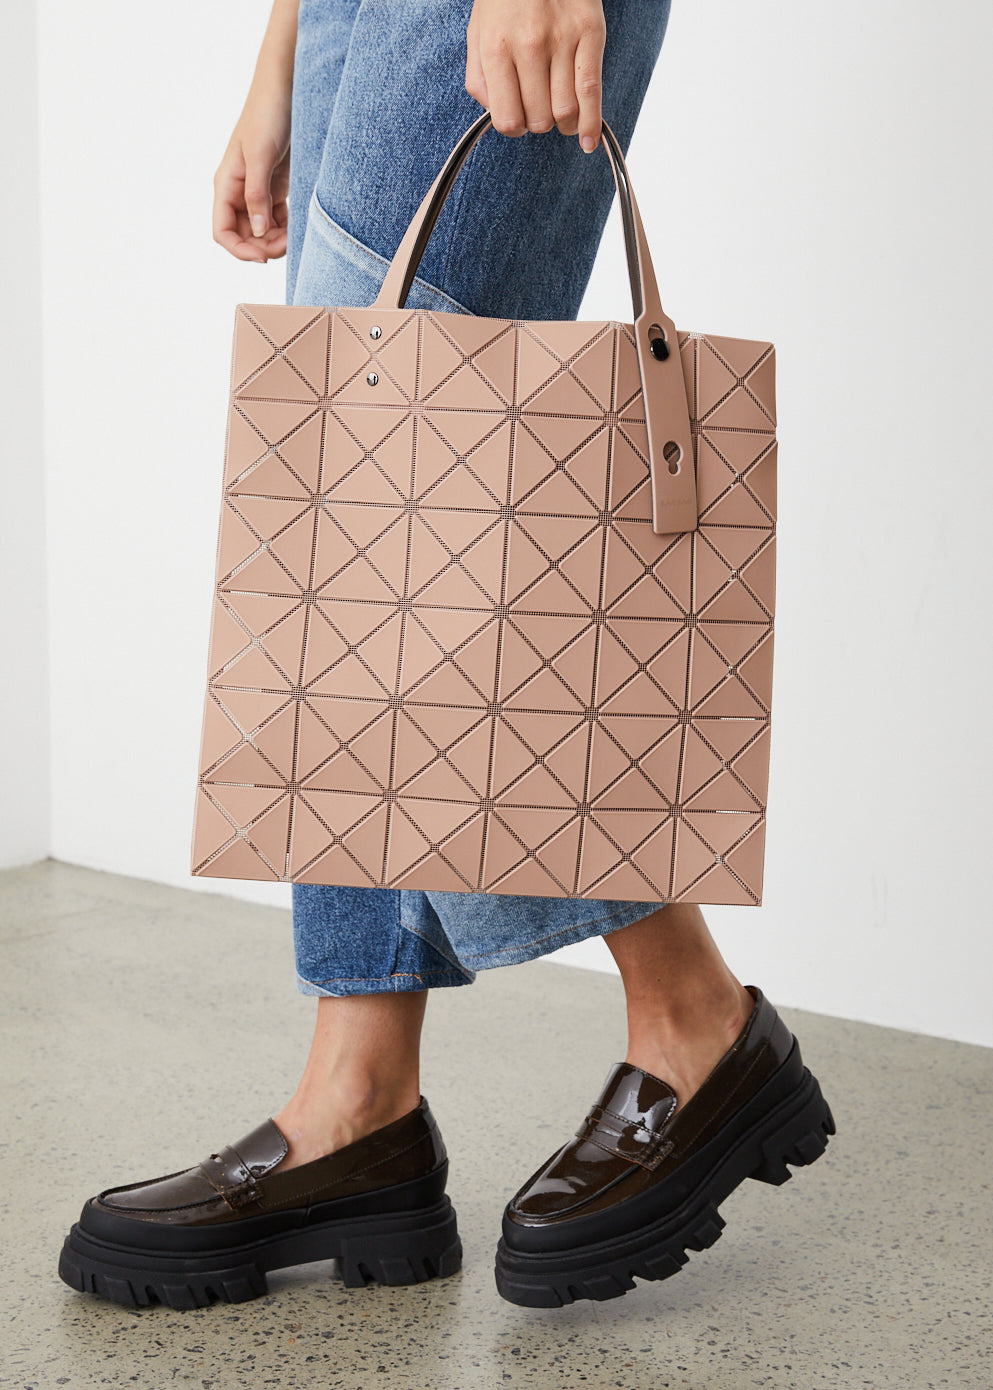 Lucent One-Tone Tote